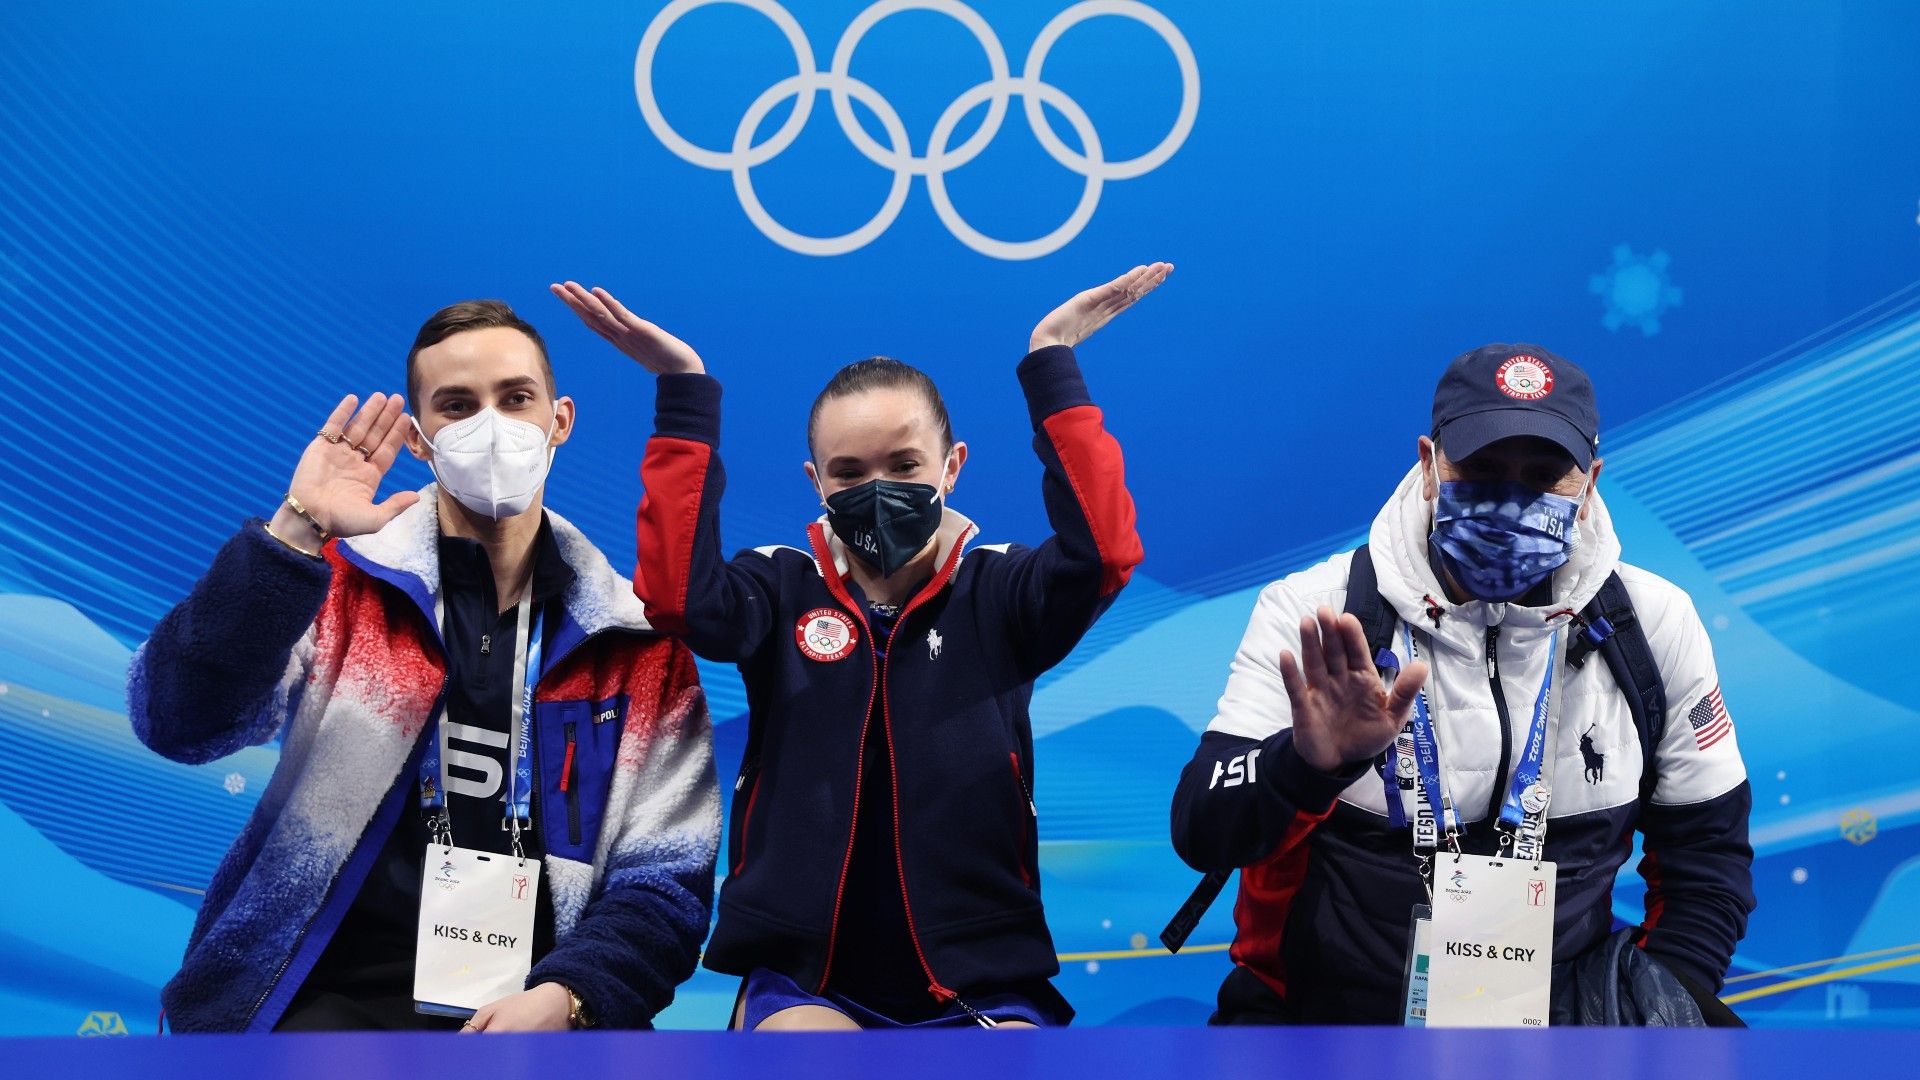 USA calls on IOC to reverse medal ceremony call